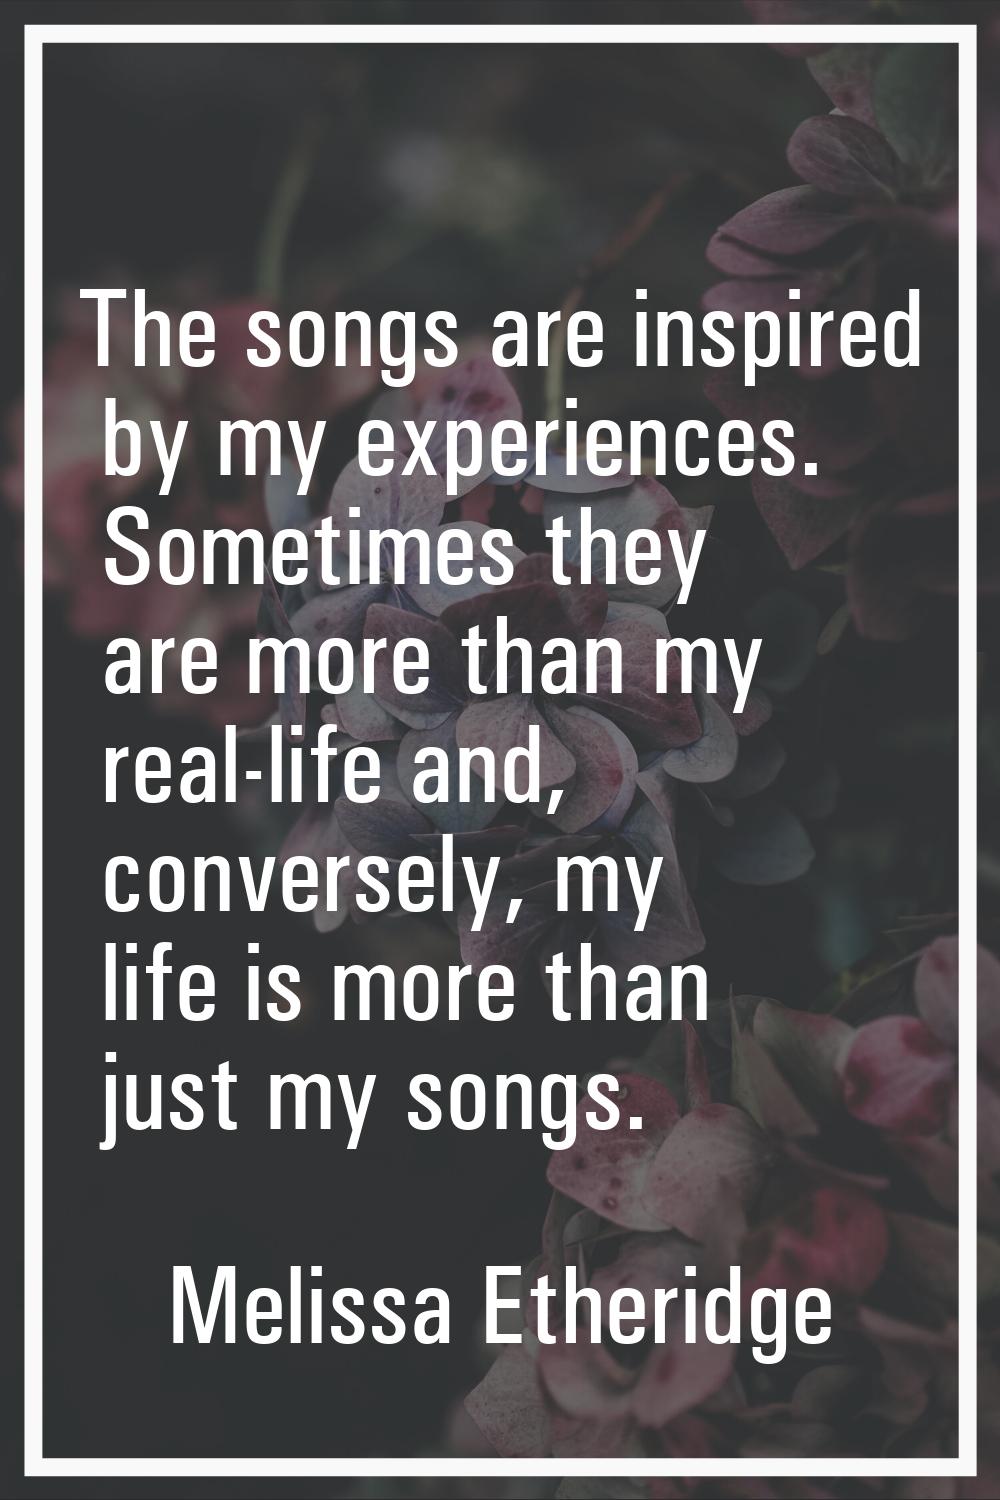 The songs are inspired by my experiences. Sometimes they are more than my real-life and, conversely